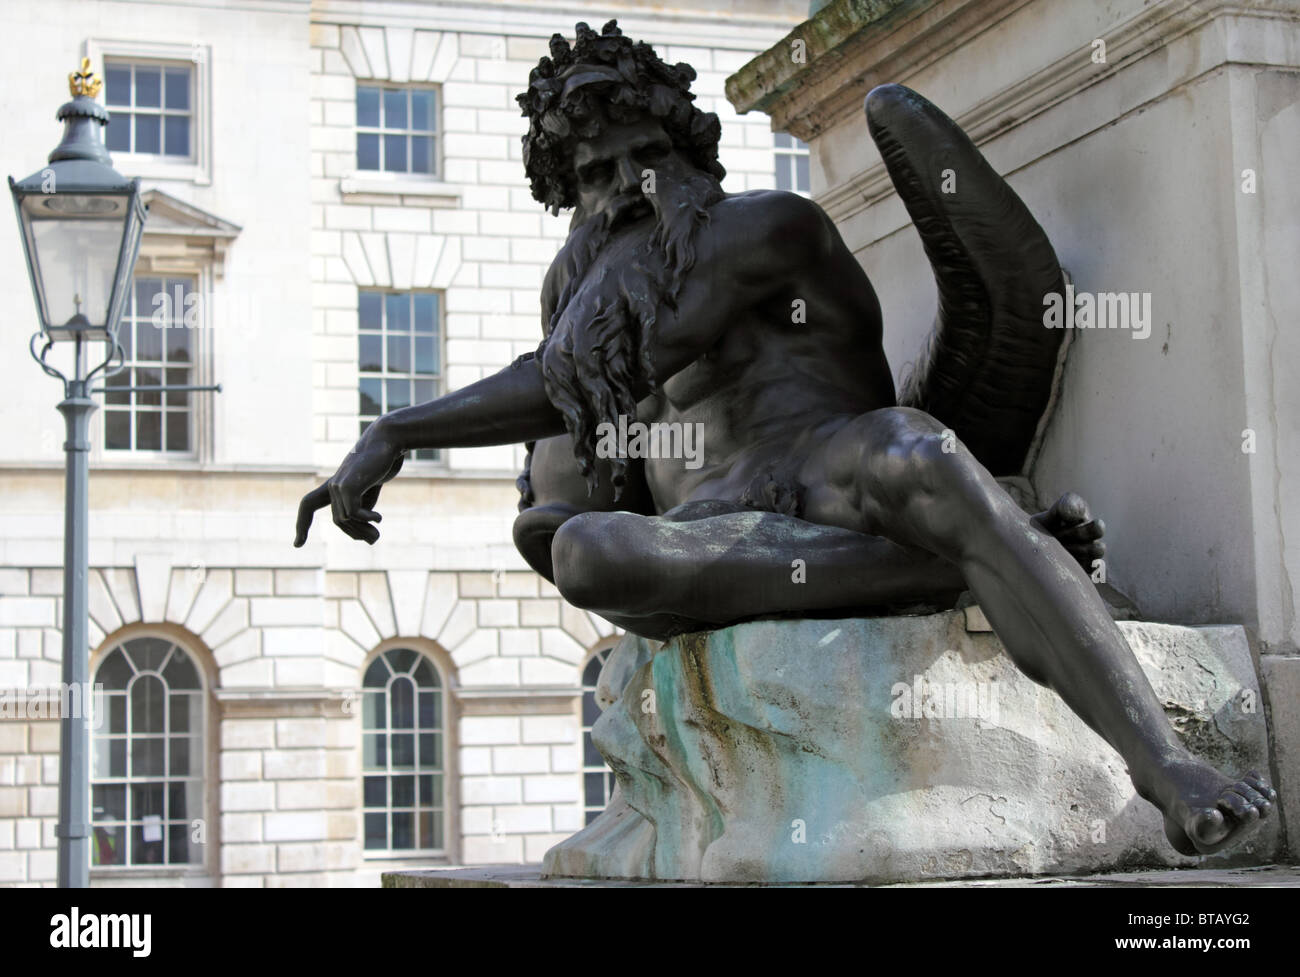 Statue of Old Father Thames, Somerset House courtyard, London, England, UK Stock Photo